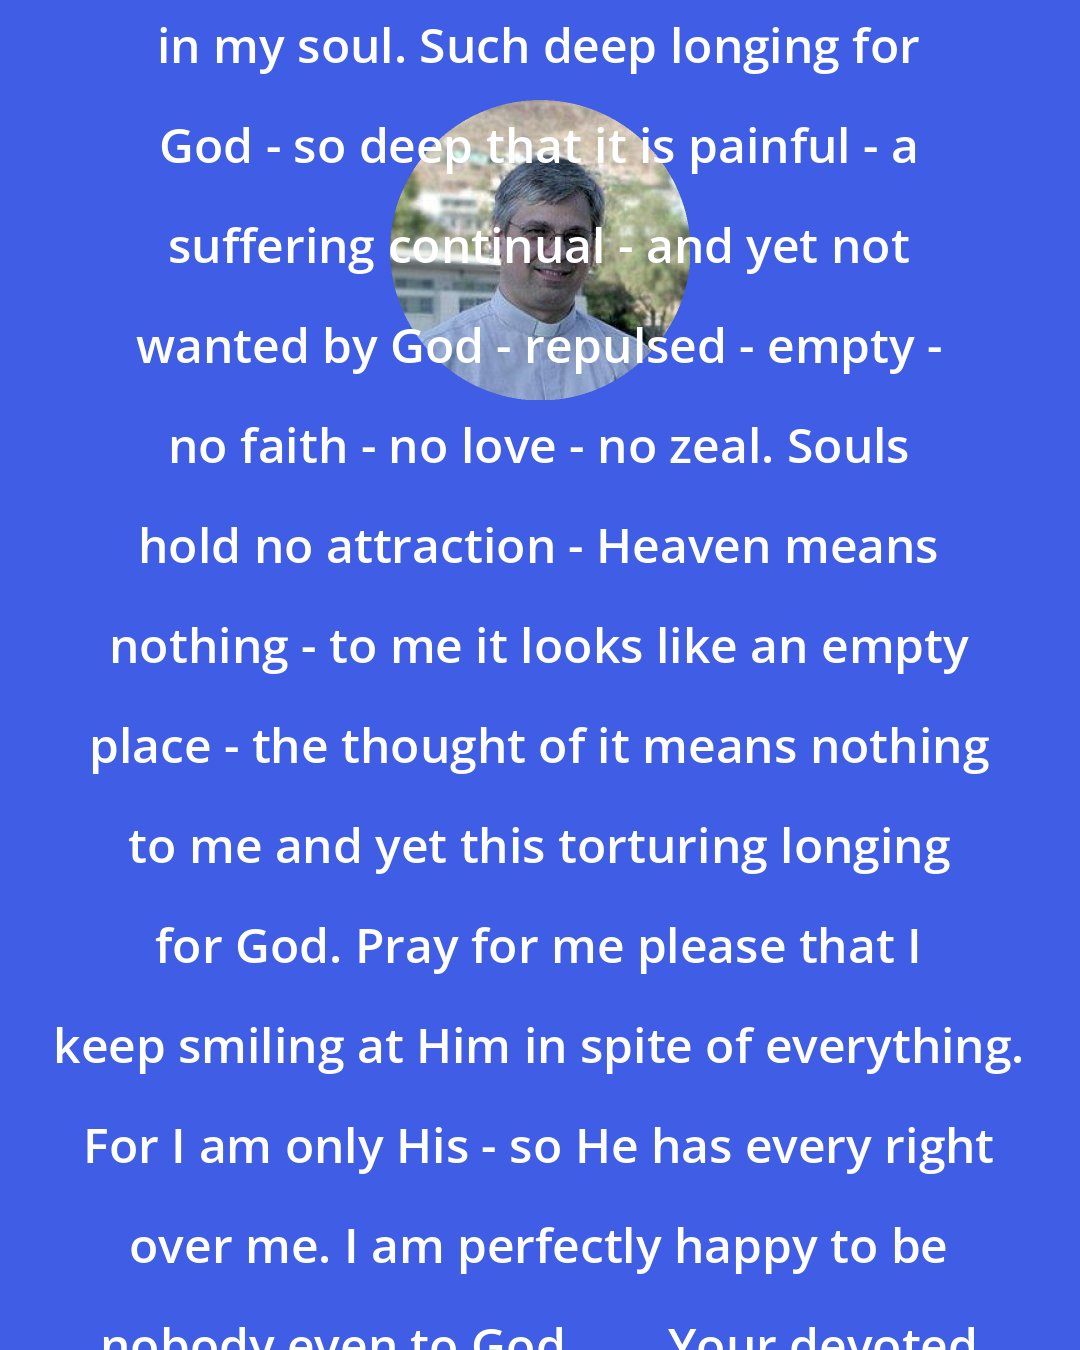 Brian Kolodiejchuk: There is so much deep contradiction in my soul. Such deep longing for God - so deep that it is painful - a suffering continual - and yet not wanted by God - repulsed - empty - no faith - no love - no zeal. Souls hold no attraction - Heaven means nothing - to me it looks like an empty place - the thought of it means nothing to me and yet this torturing longing for God. Pray for me please that I keep smiling at Him in spite of everything. For I am only His - so He has every right over me. I am perfectly happy to be nobody even to God. . . . Your devoted child in J.C. M. Teresa